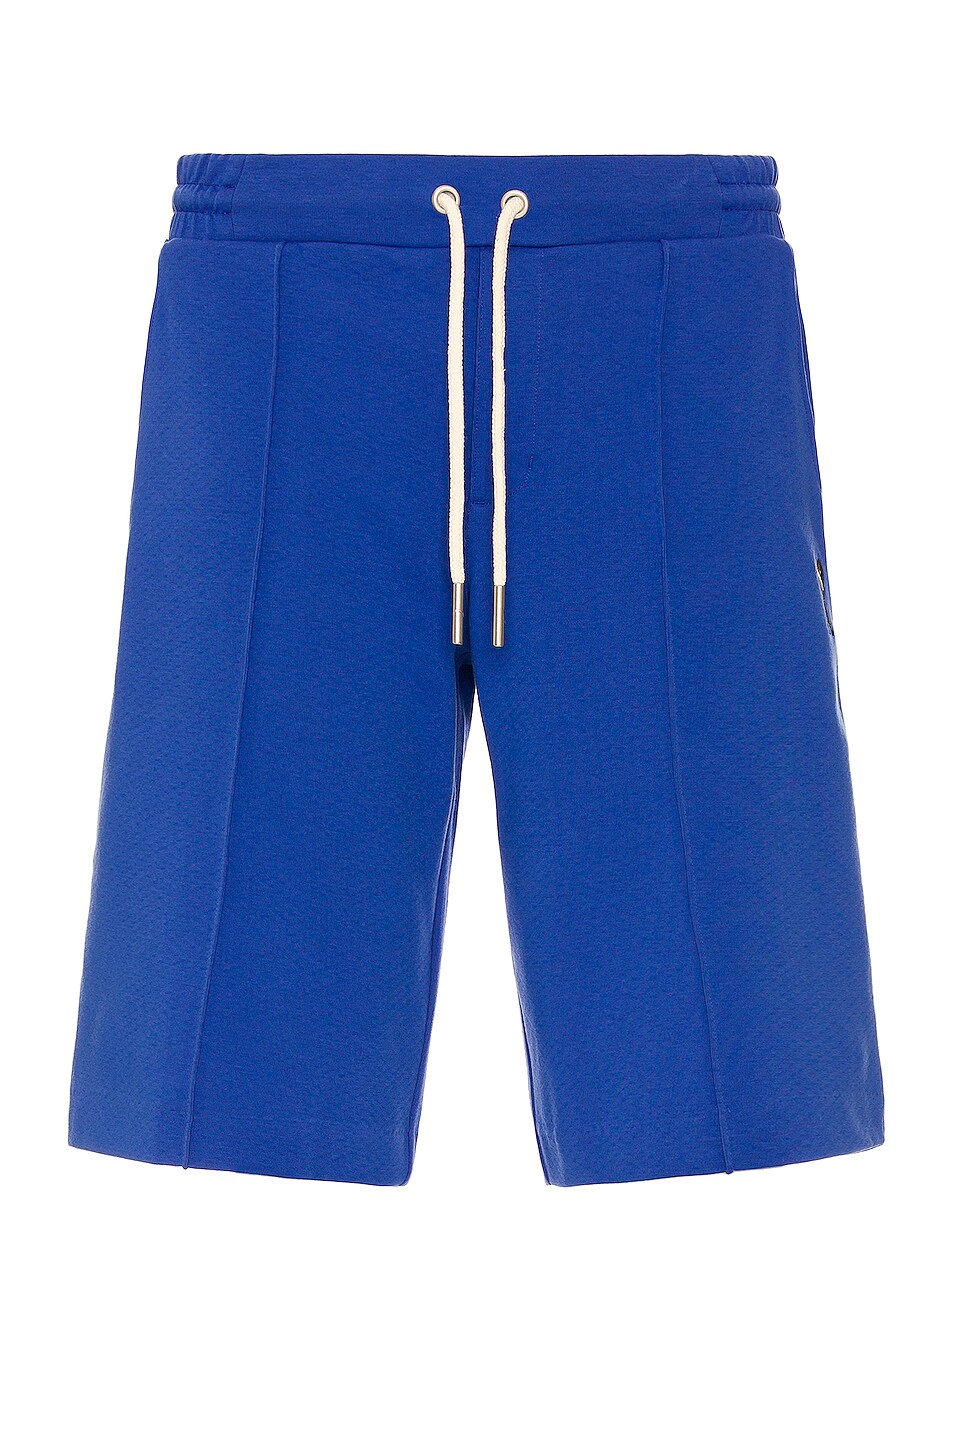 Image 1 of Puma Select AMI Shorts in Dazzling Blue